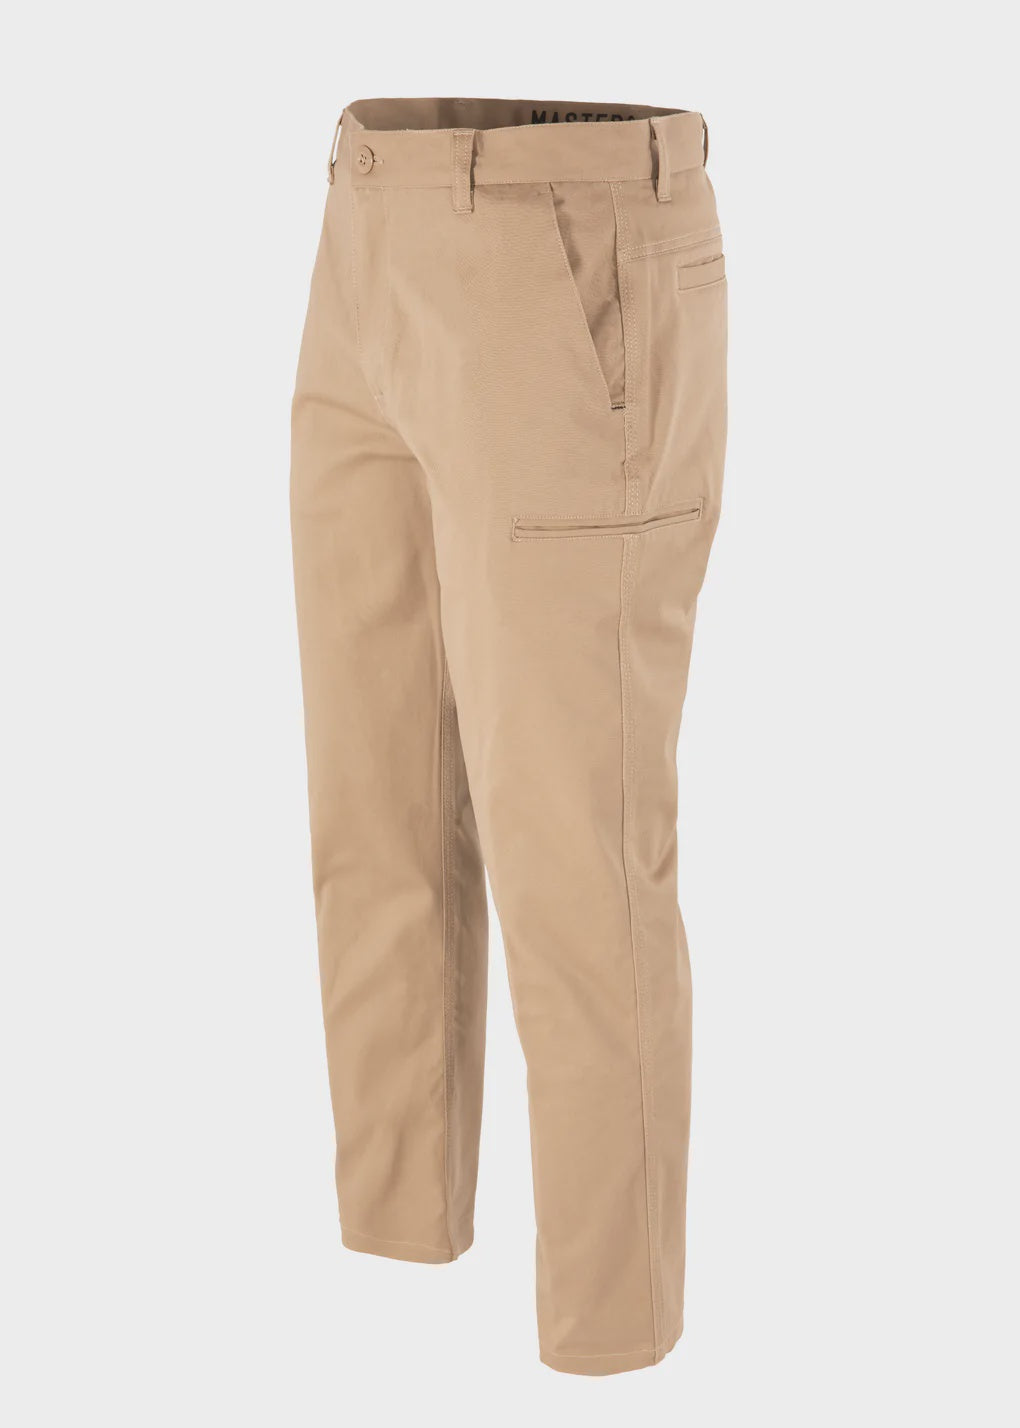 MENS PANTS - 189119002 - WORK  IGNITION